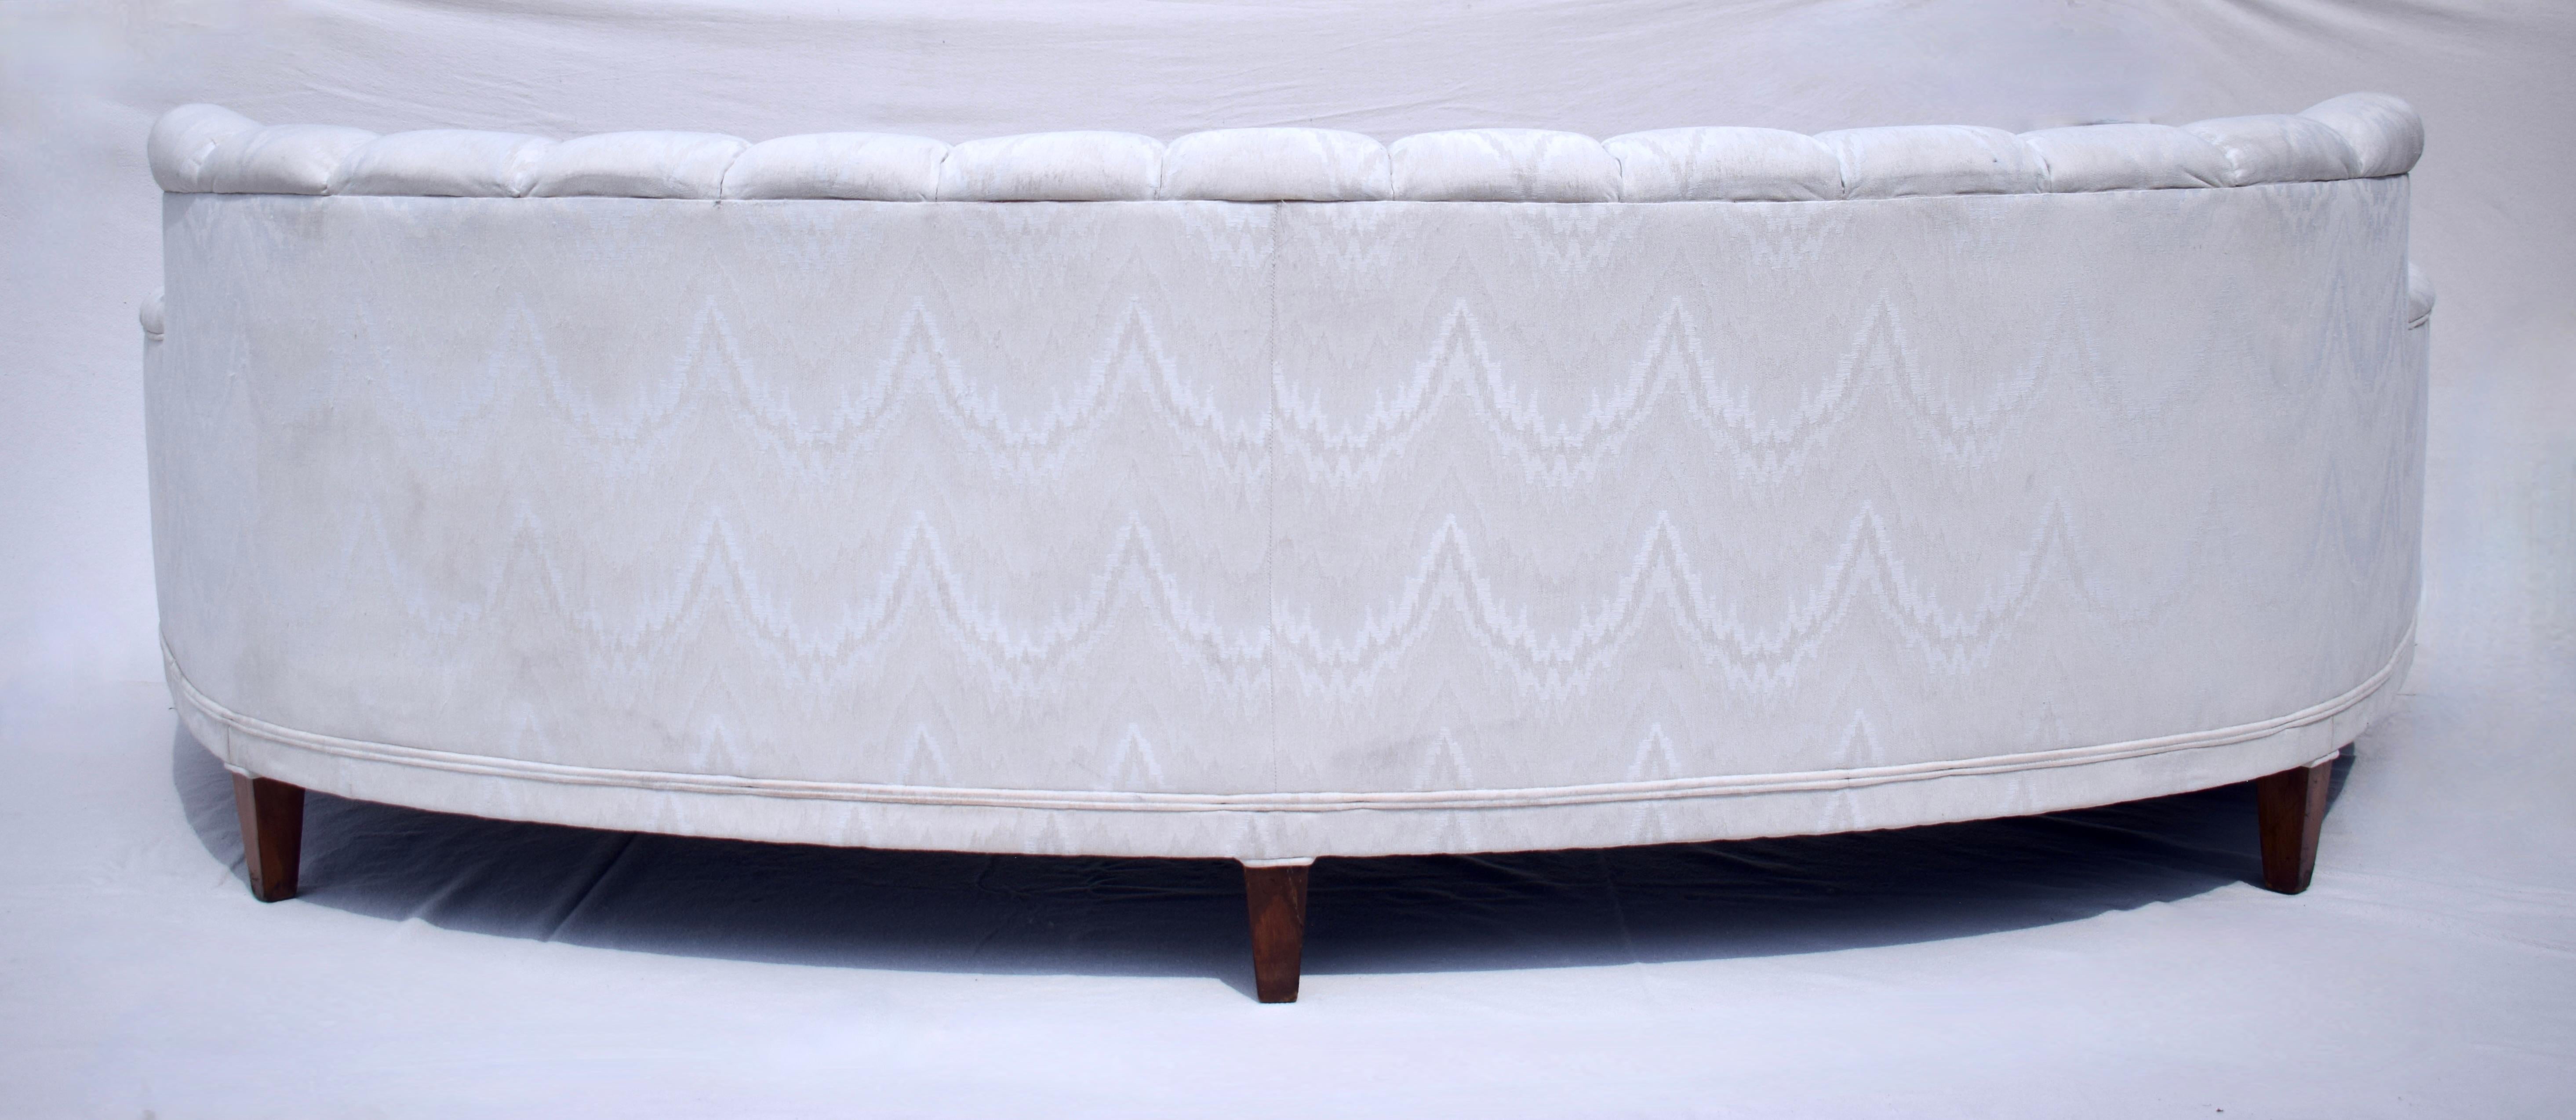 Upholstery Harvey Probber Curved Crescent Sofa, 1960s For Sale